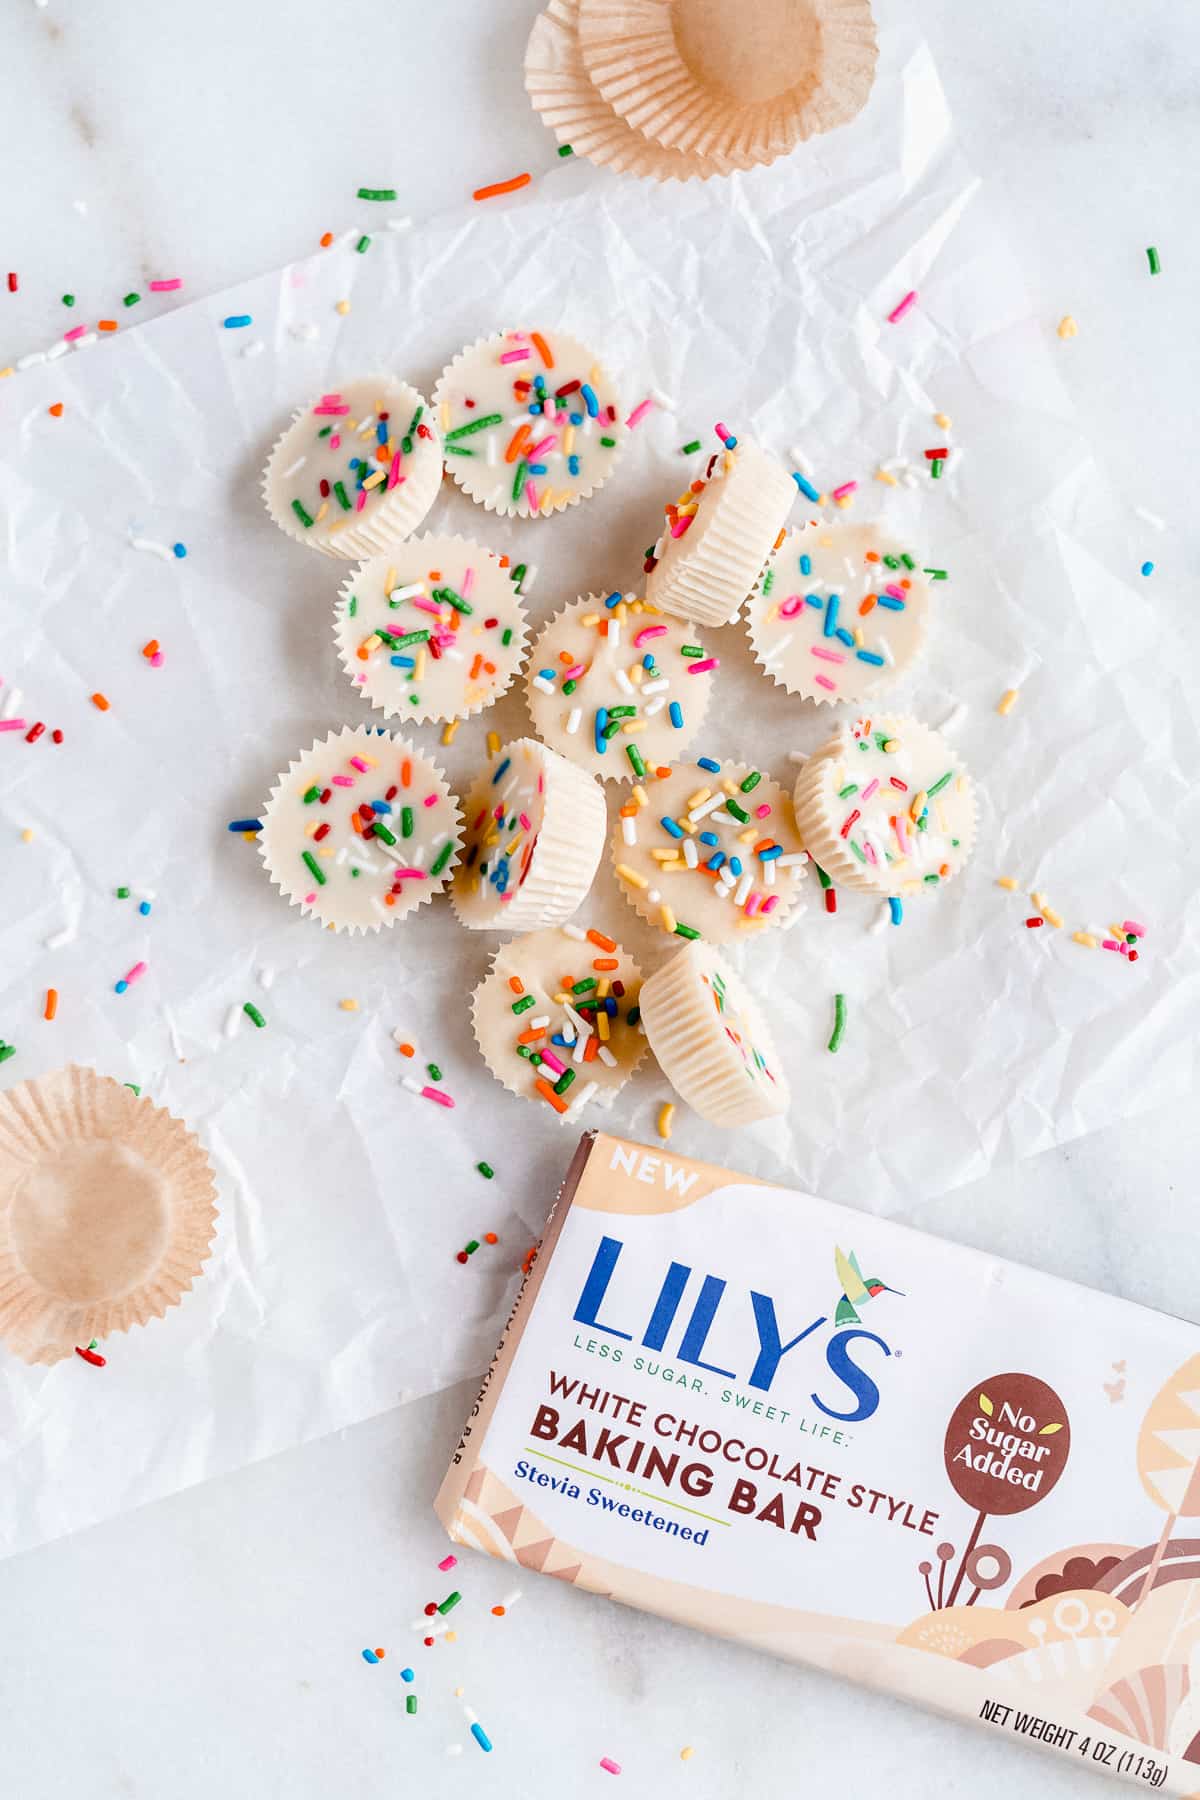 Pile of white chocolate peanut butter cups on white parchment paper with rainbow sprinkles and Lily's White Chocolate bar in the corner